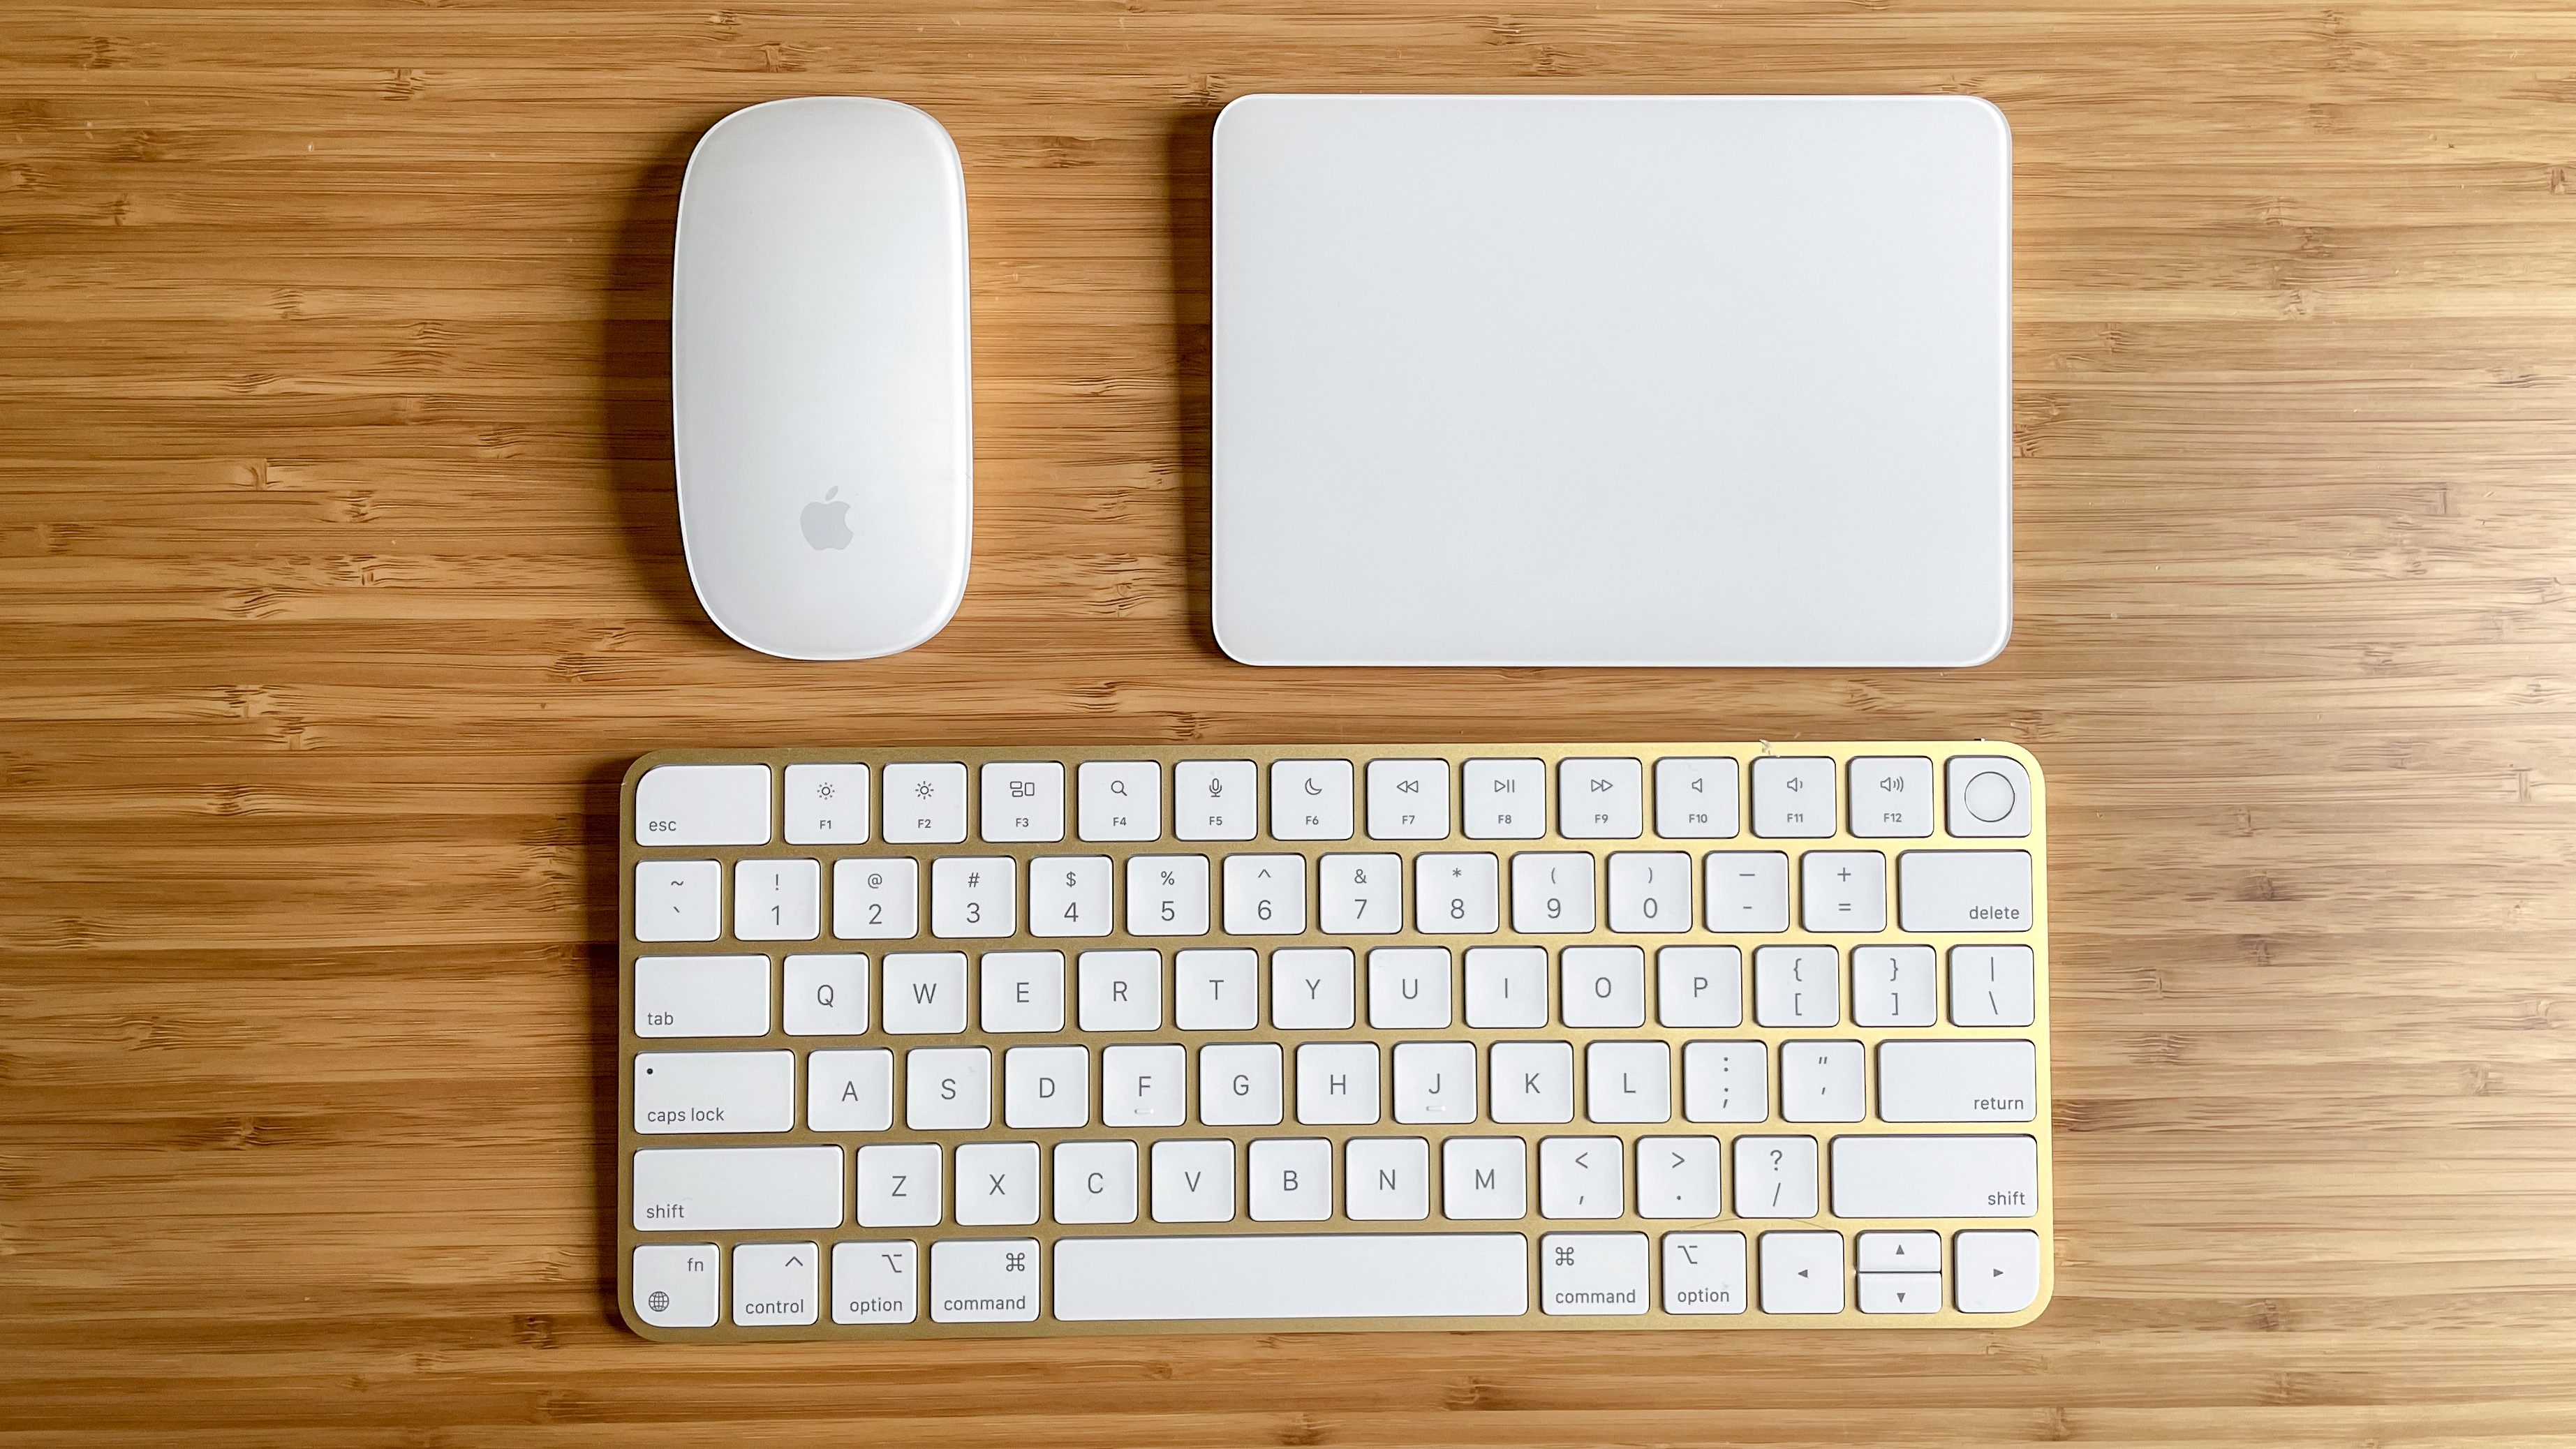 Apple just made its best Mac keyboard available to buy separately